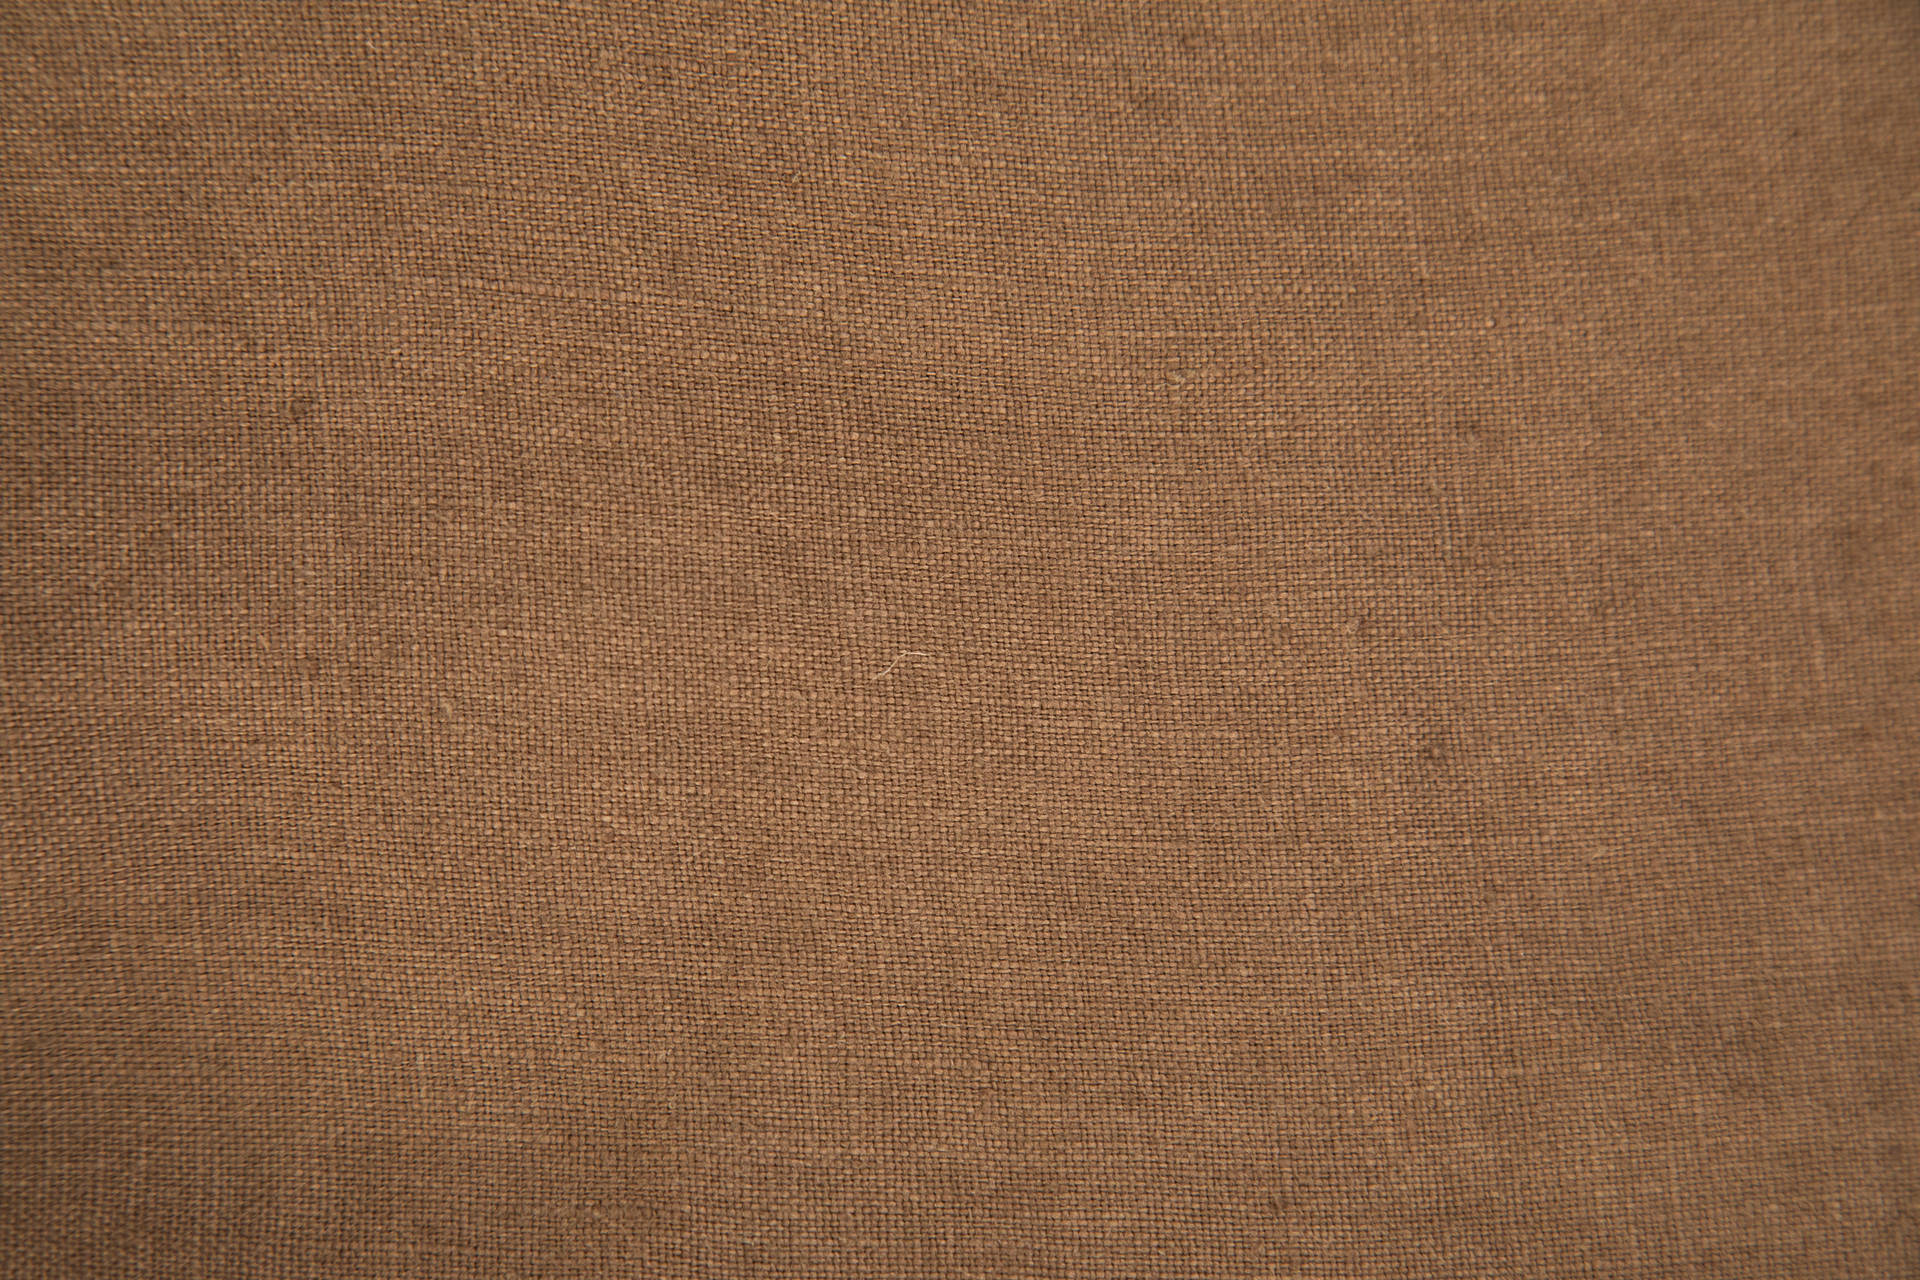 6720X4480 Brown Wallpaper and Background